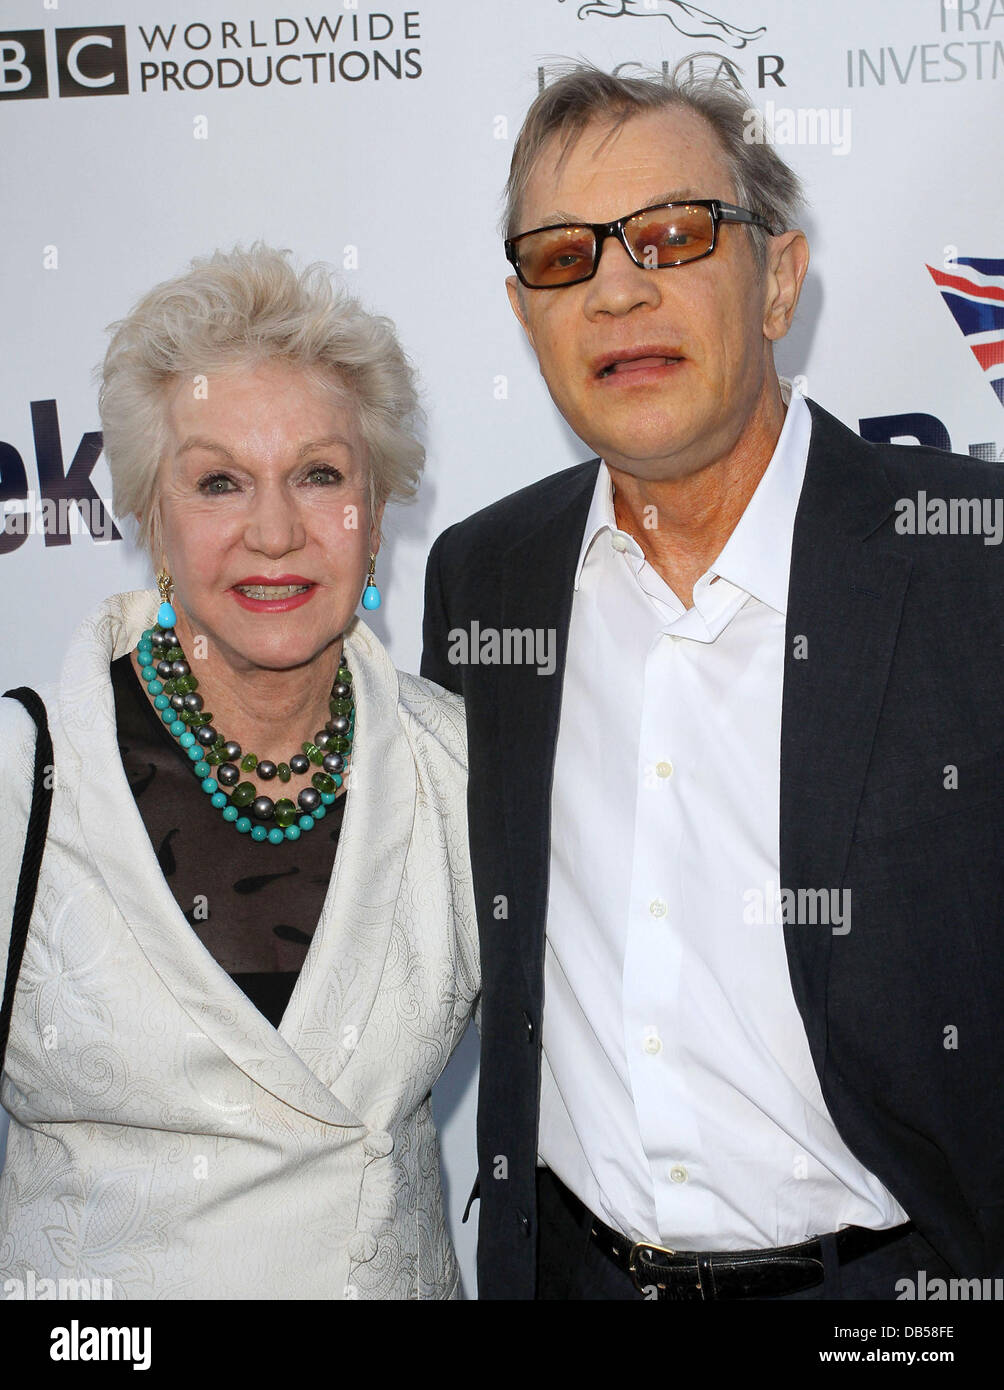 Michael York and his wife Patricia McCallum BritWeek's VIP Launch reception held at the British Consulate Los Angeles, California - 26.04.11 Stock Photo